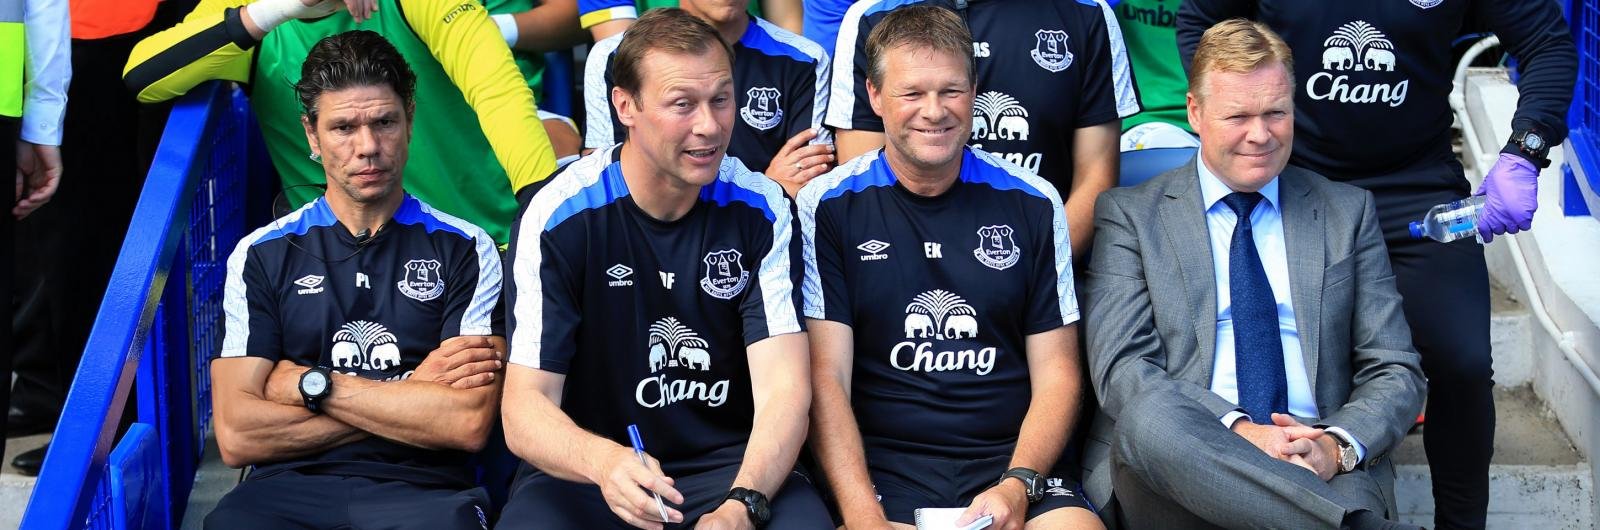 Plenty of positives for Ronald Koeman’s Everton after opening draw